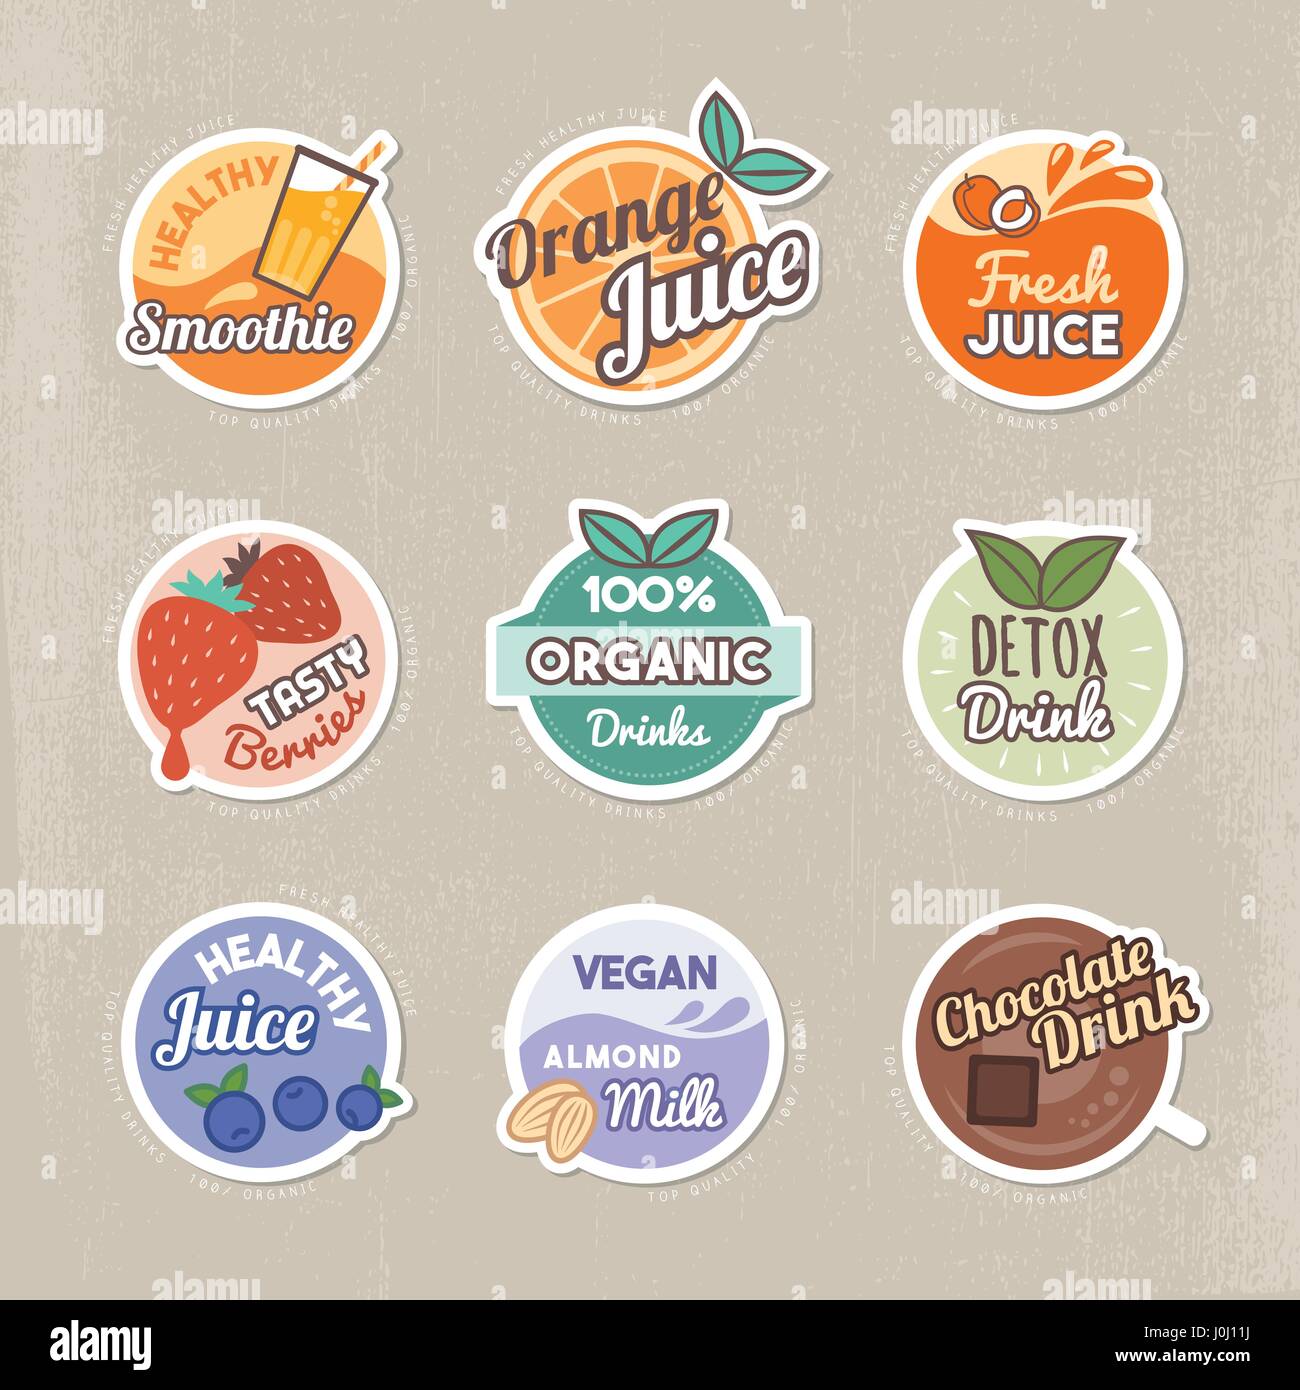 Healthy drinks, juice and smoothies vintage badges stickers collection Stock Vector